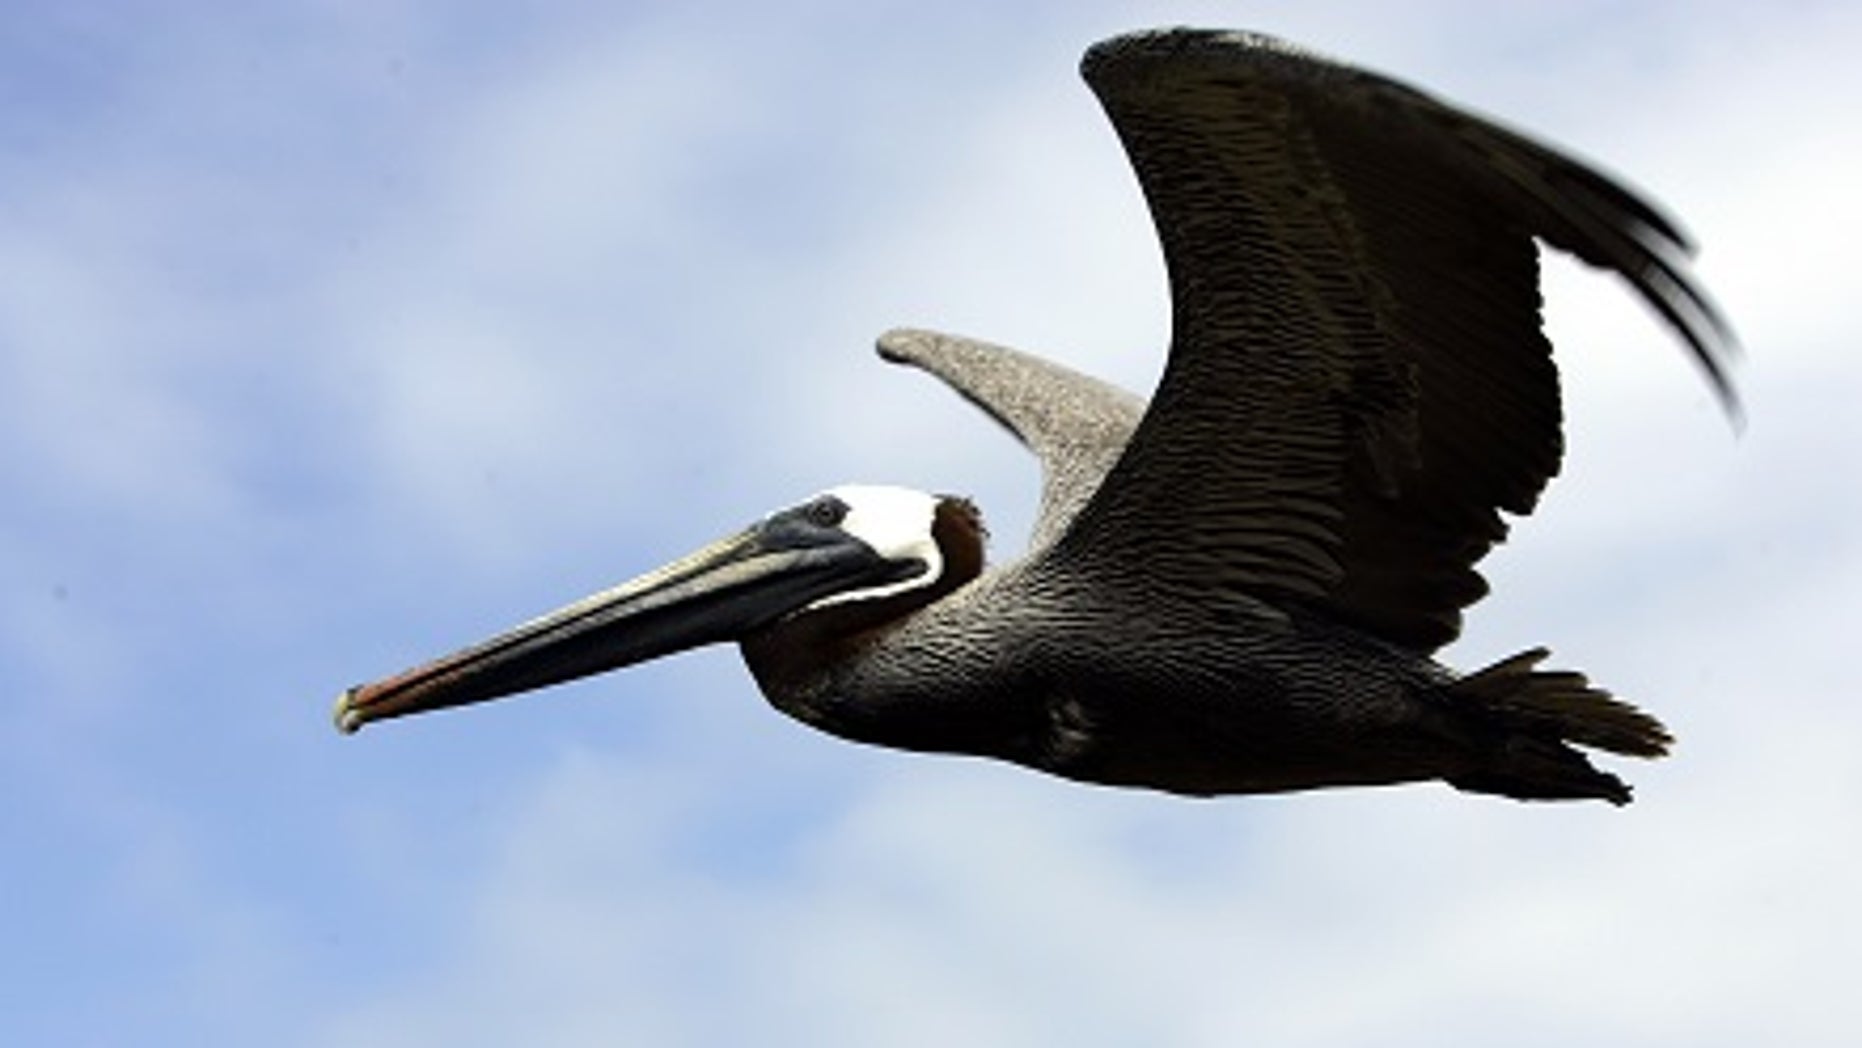 Ridiculous: Arrest warrant issued for Maryland man accused of tackling pelican Pelican